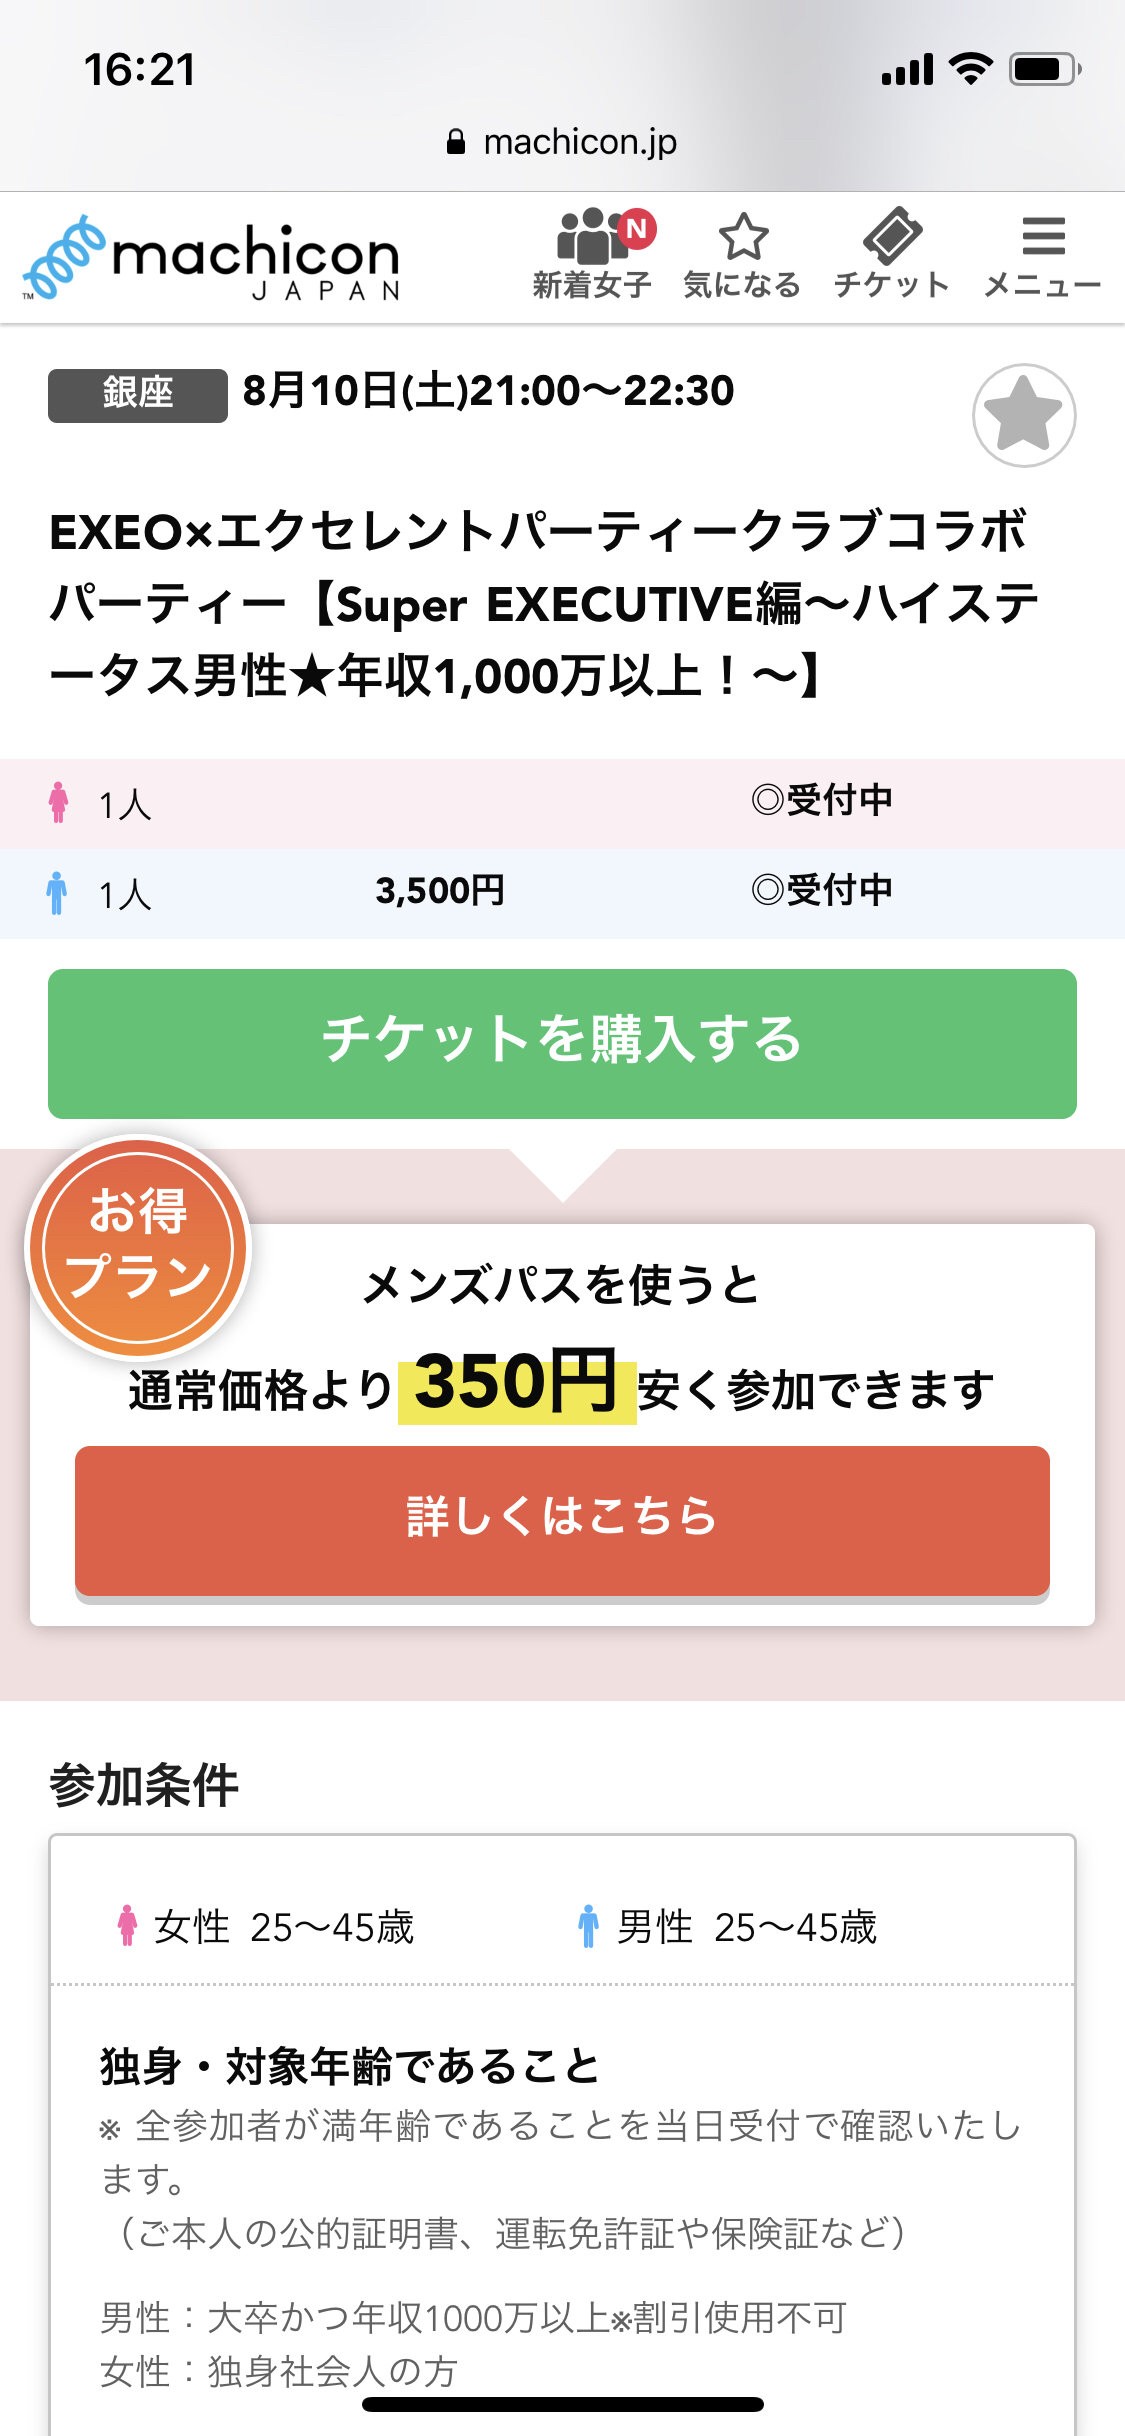 [Sad news] Marriage party “Men's annual income of 10 million or more is 3500 yen! Other than that!